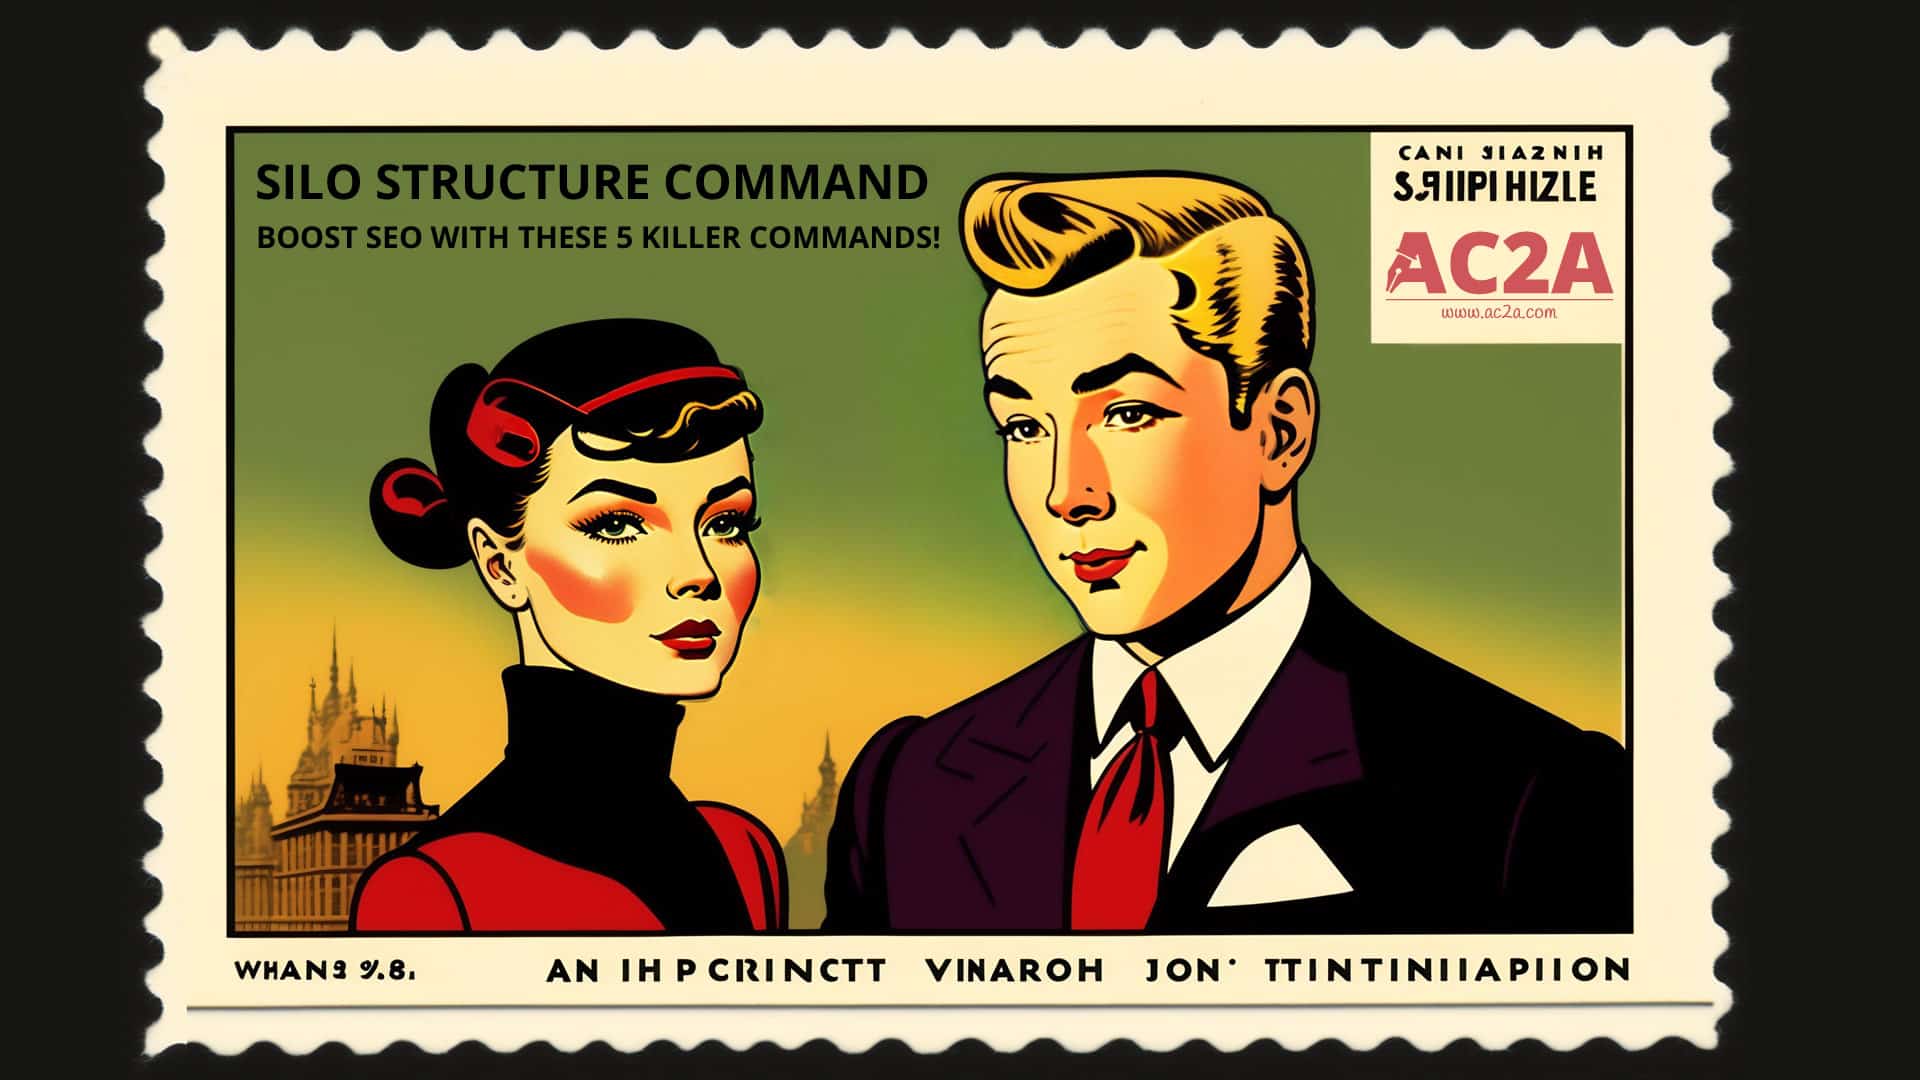 An entertaining image in Hergé style for: Silo Structure Command.